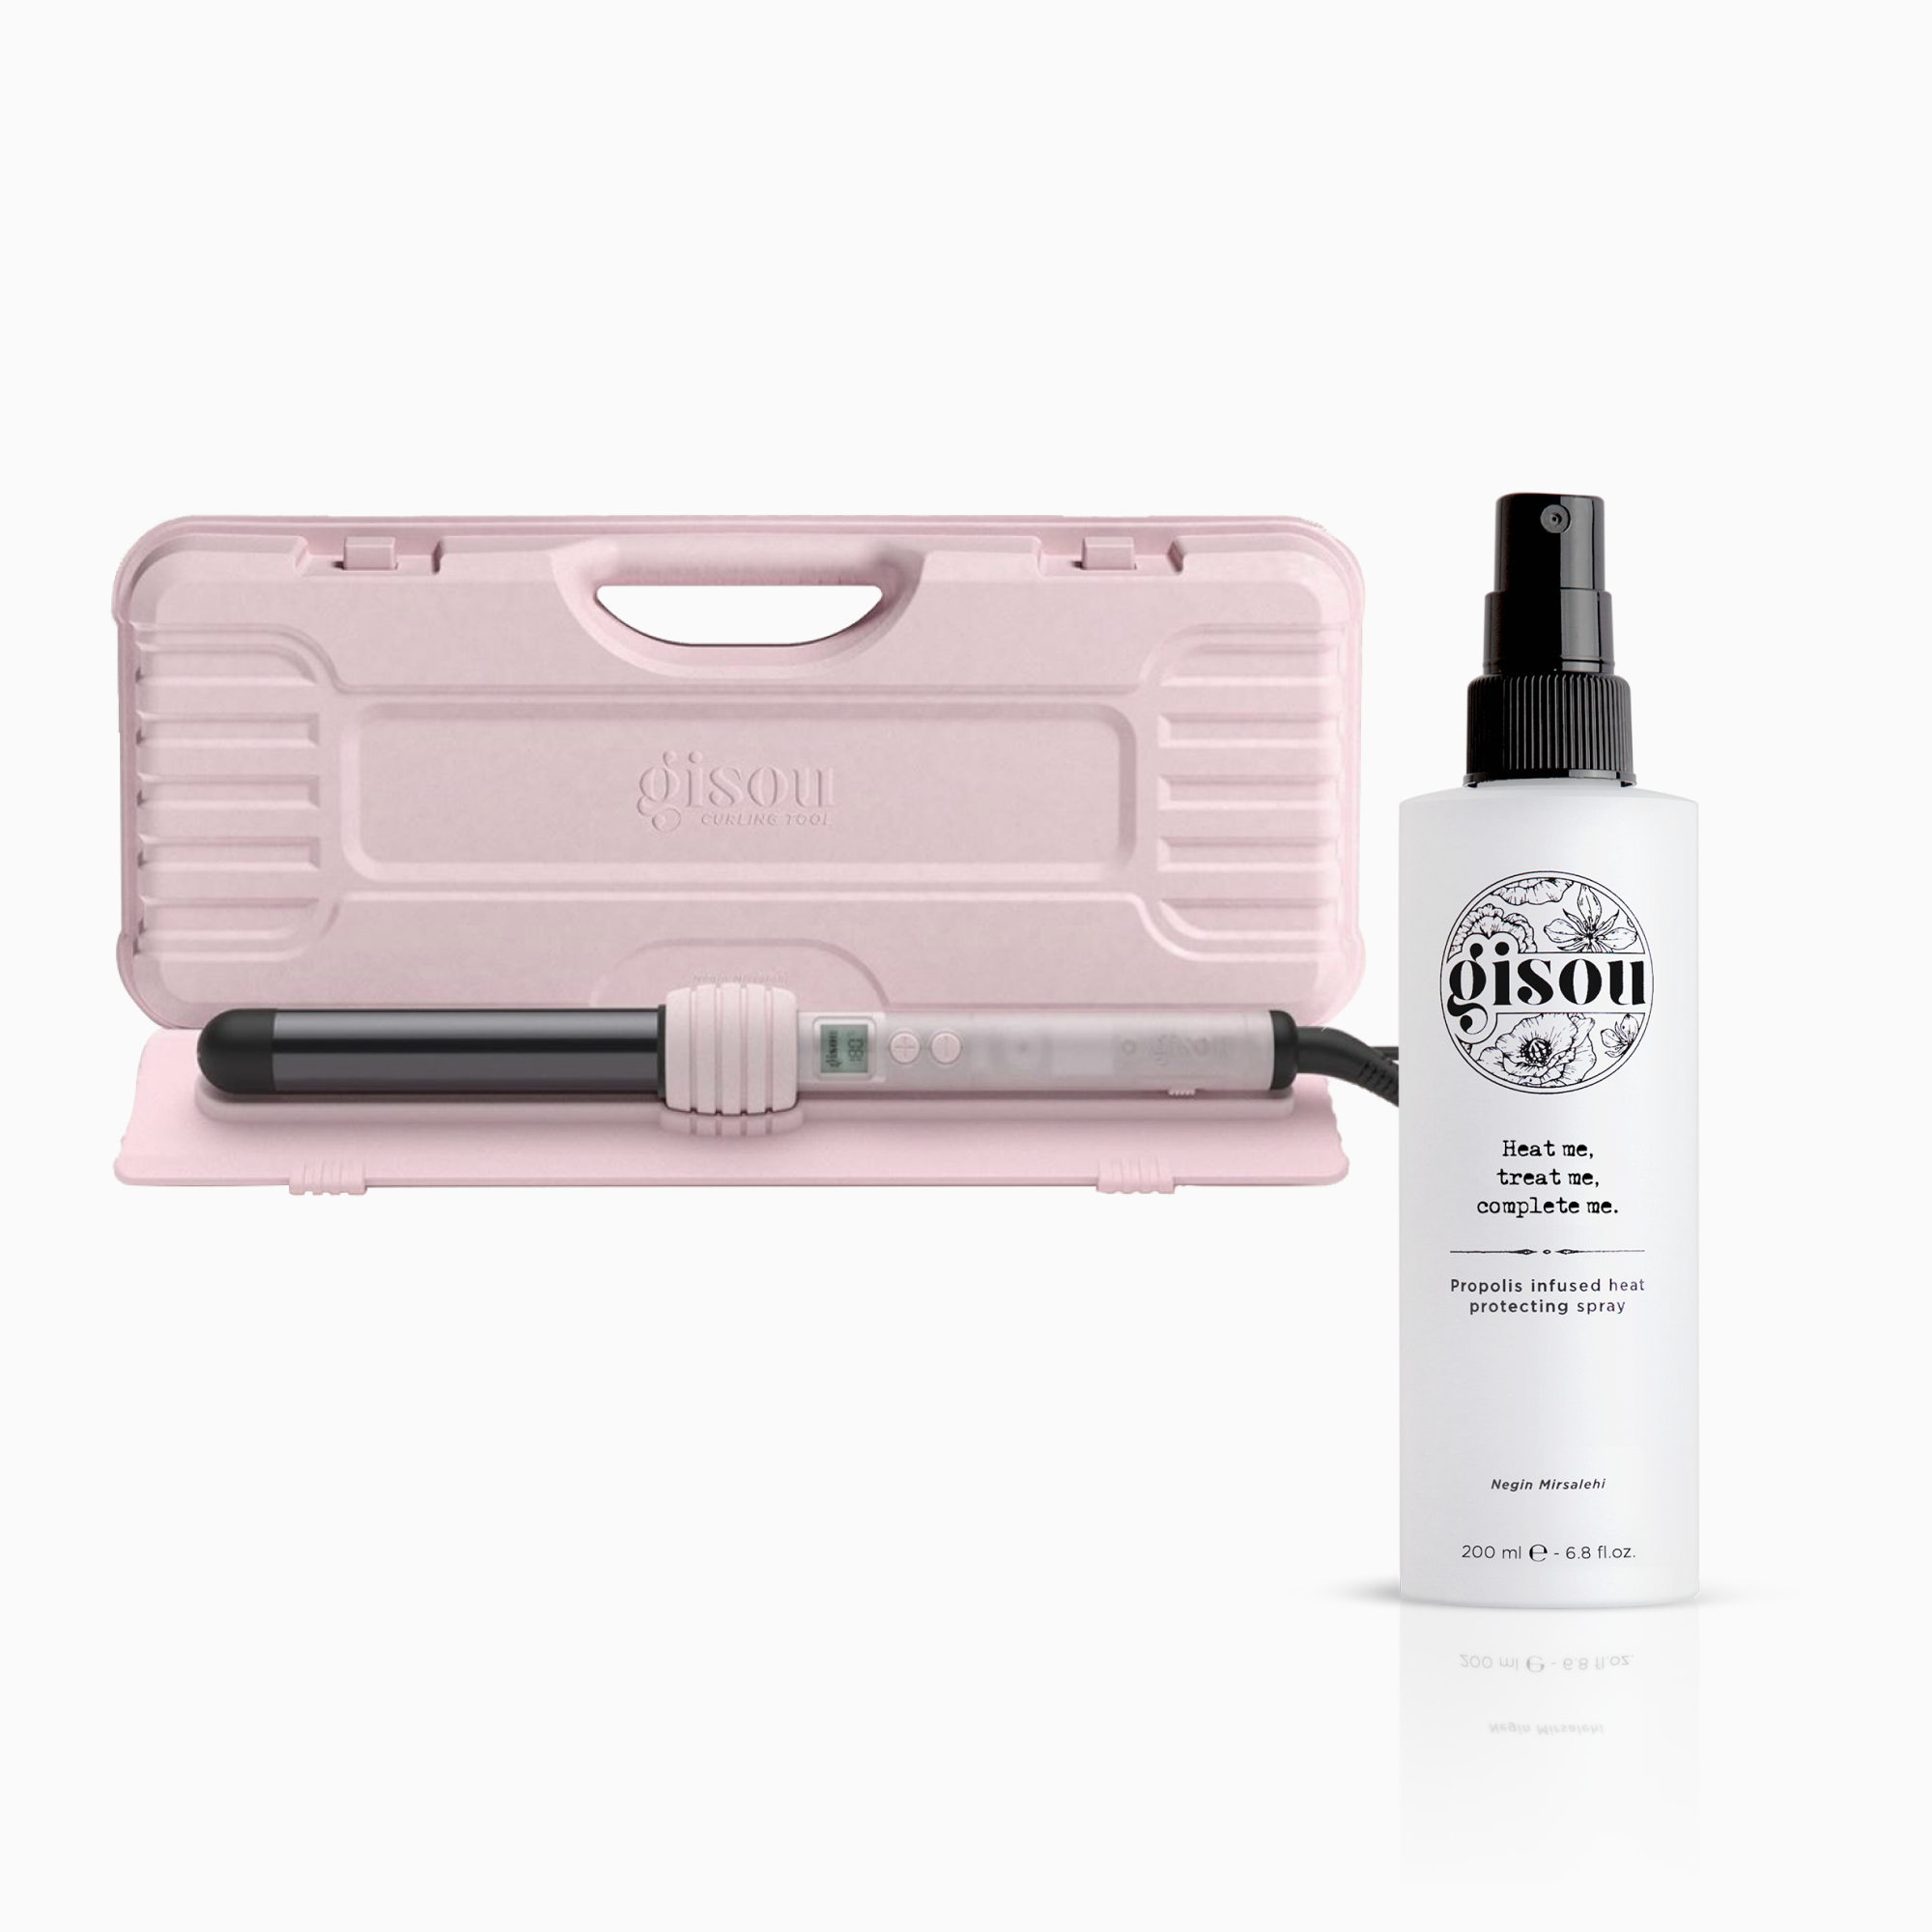 All day curl set with curling iron and propolis infused heat protecting spray